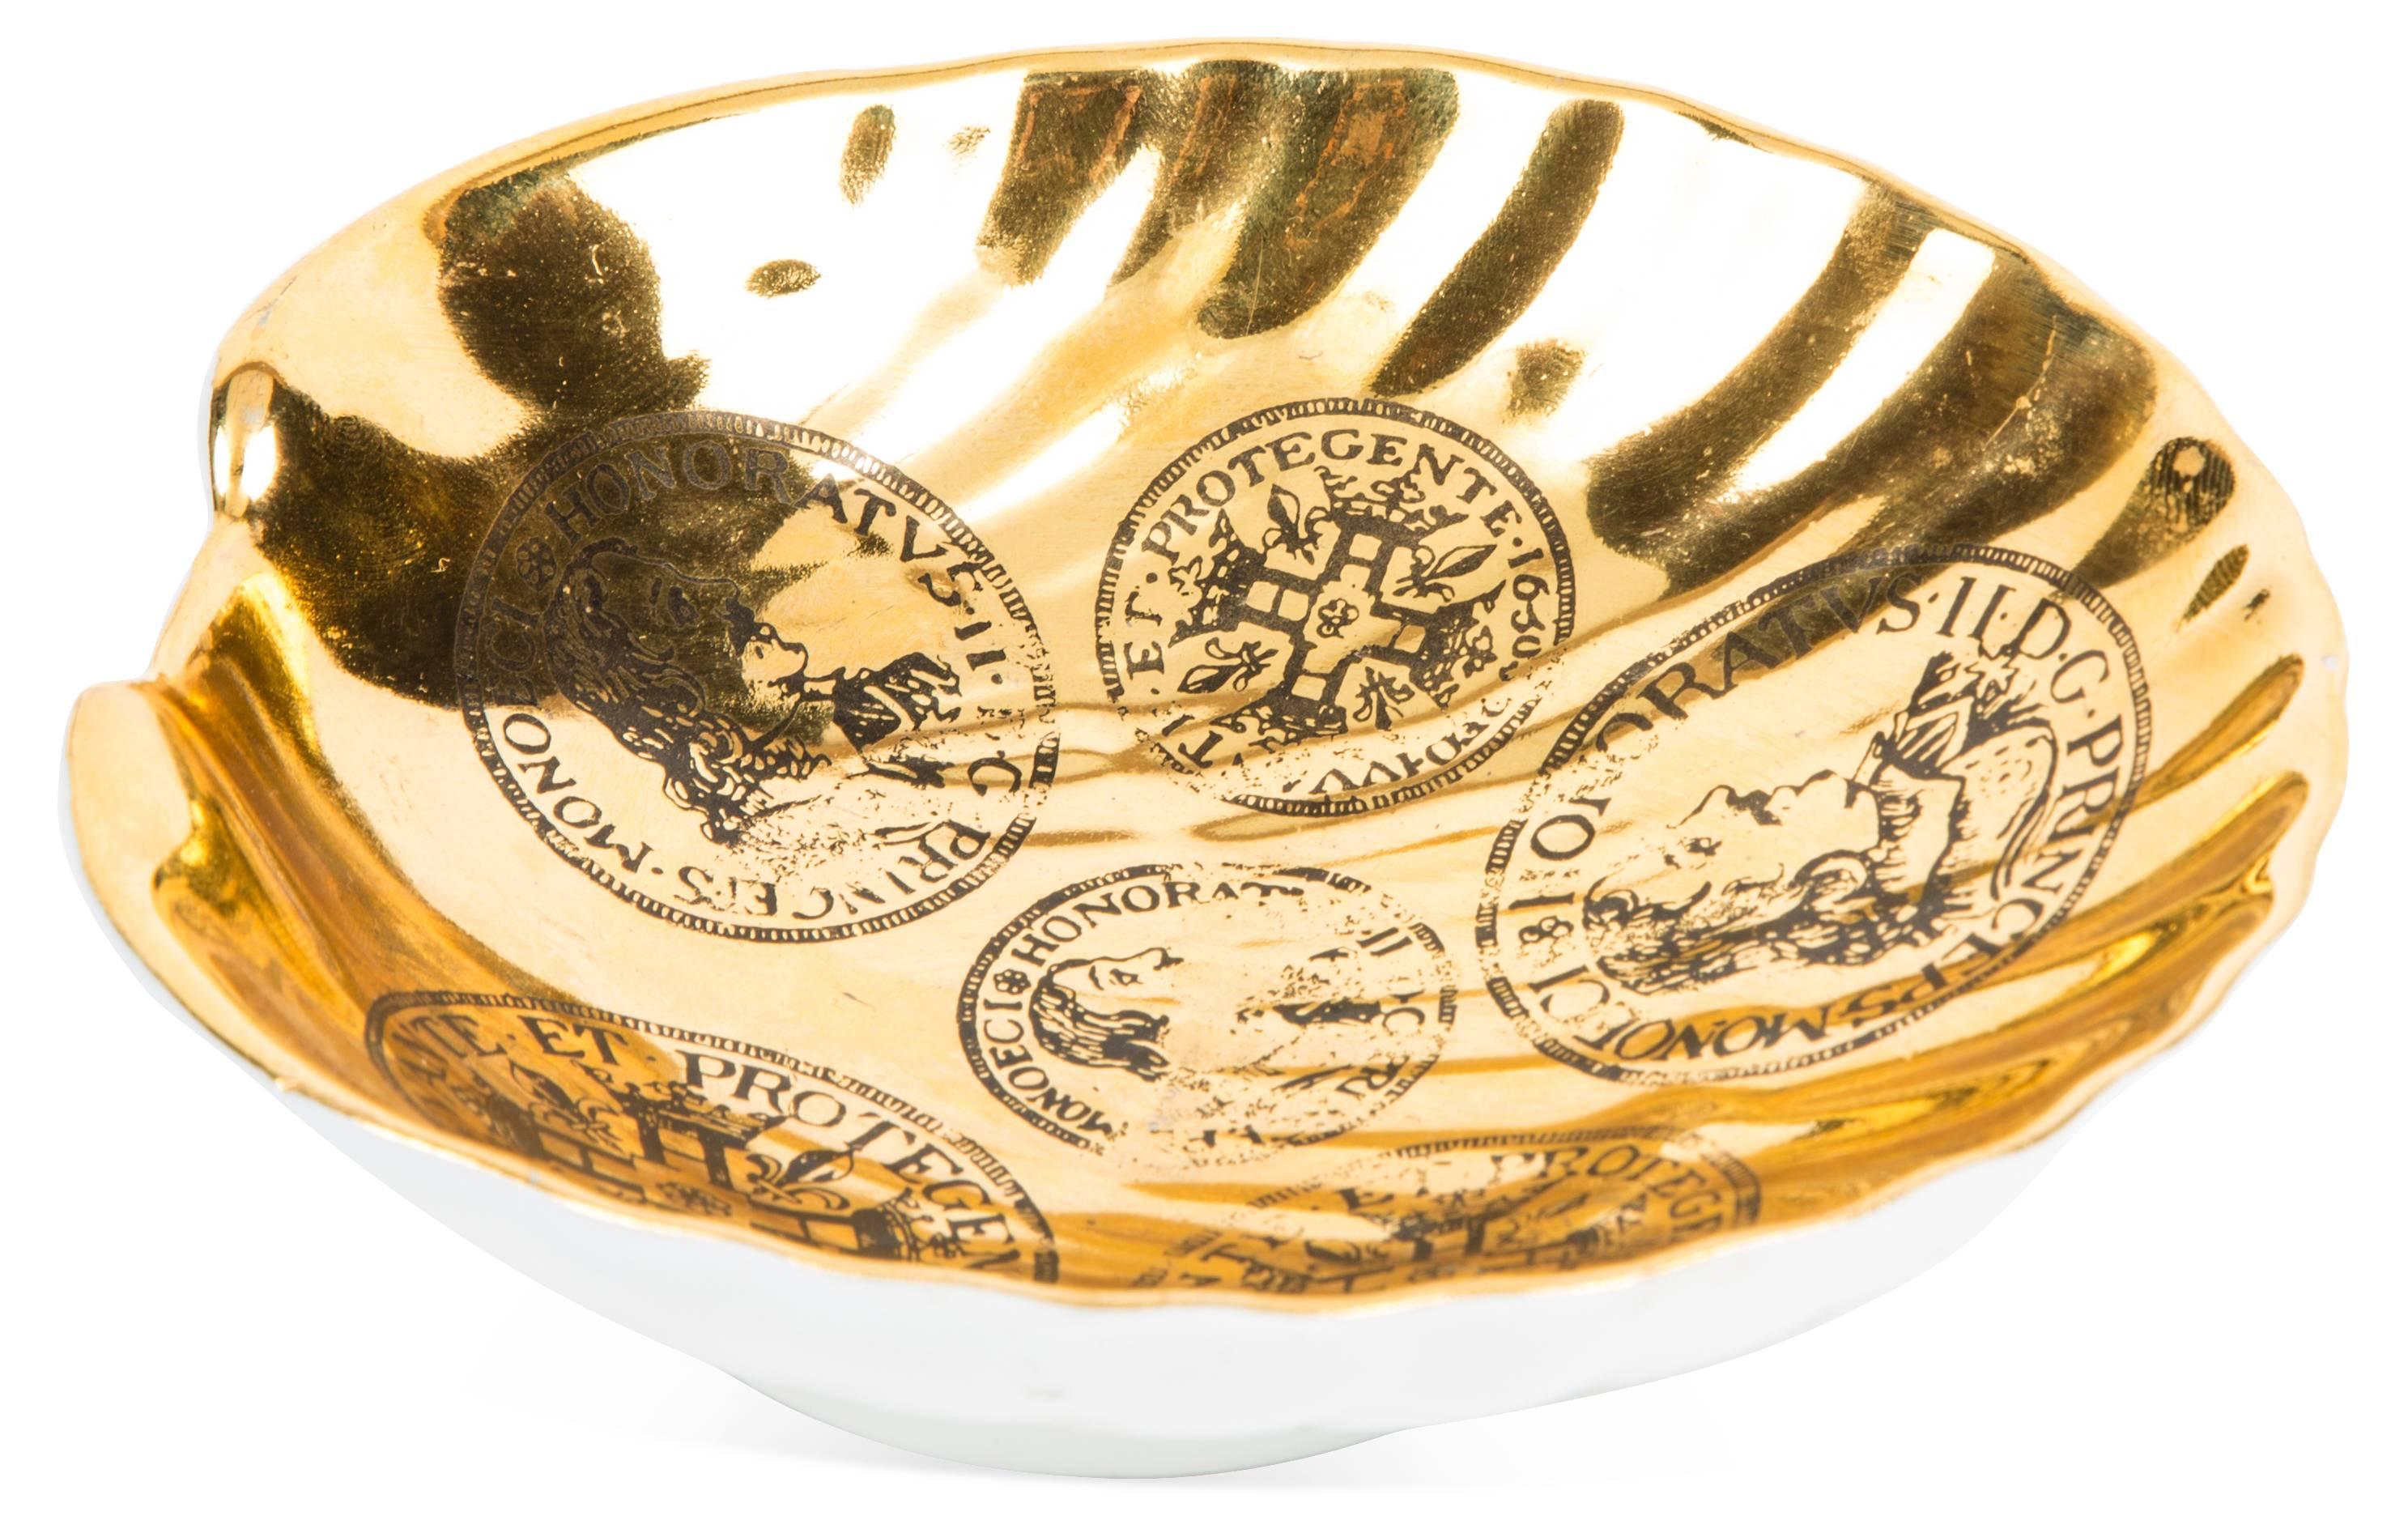 Fornasetti style white and gold porcelain shell form dish with trompe-l'œil coin/bust decoration.
 